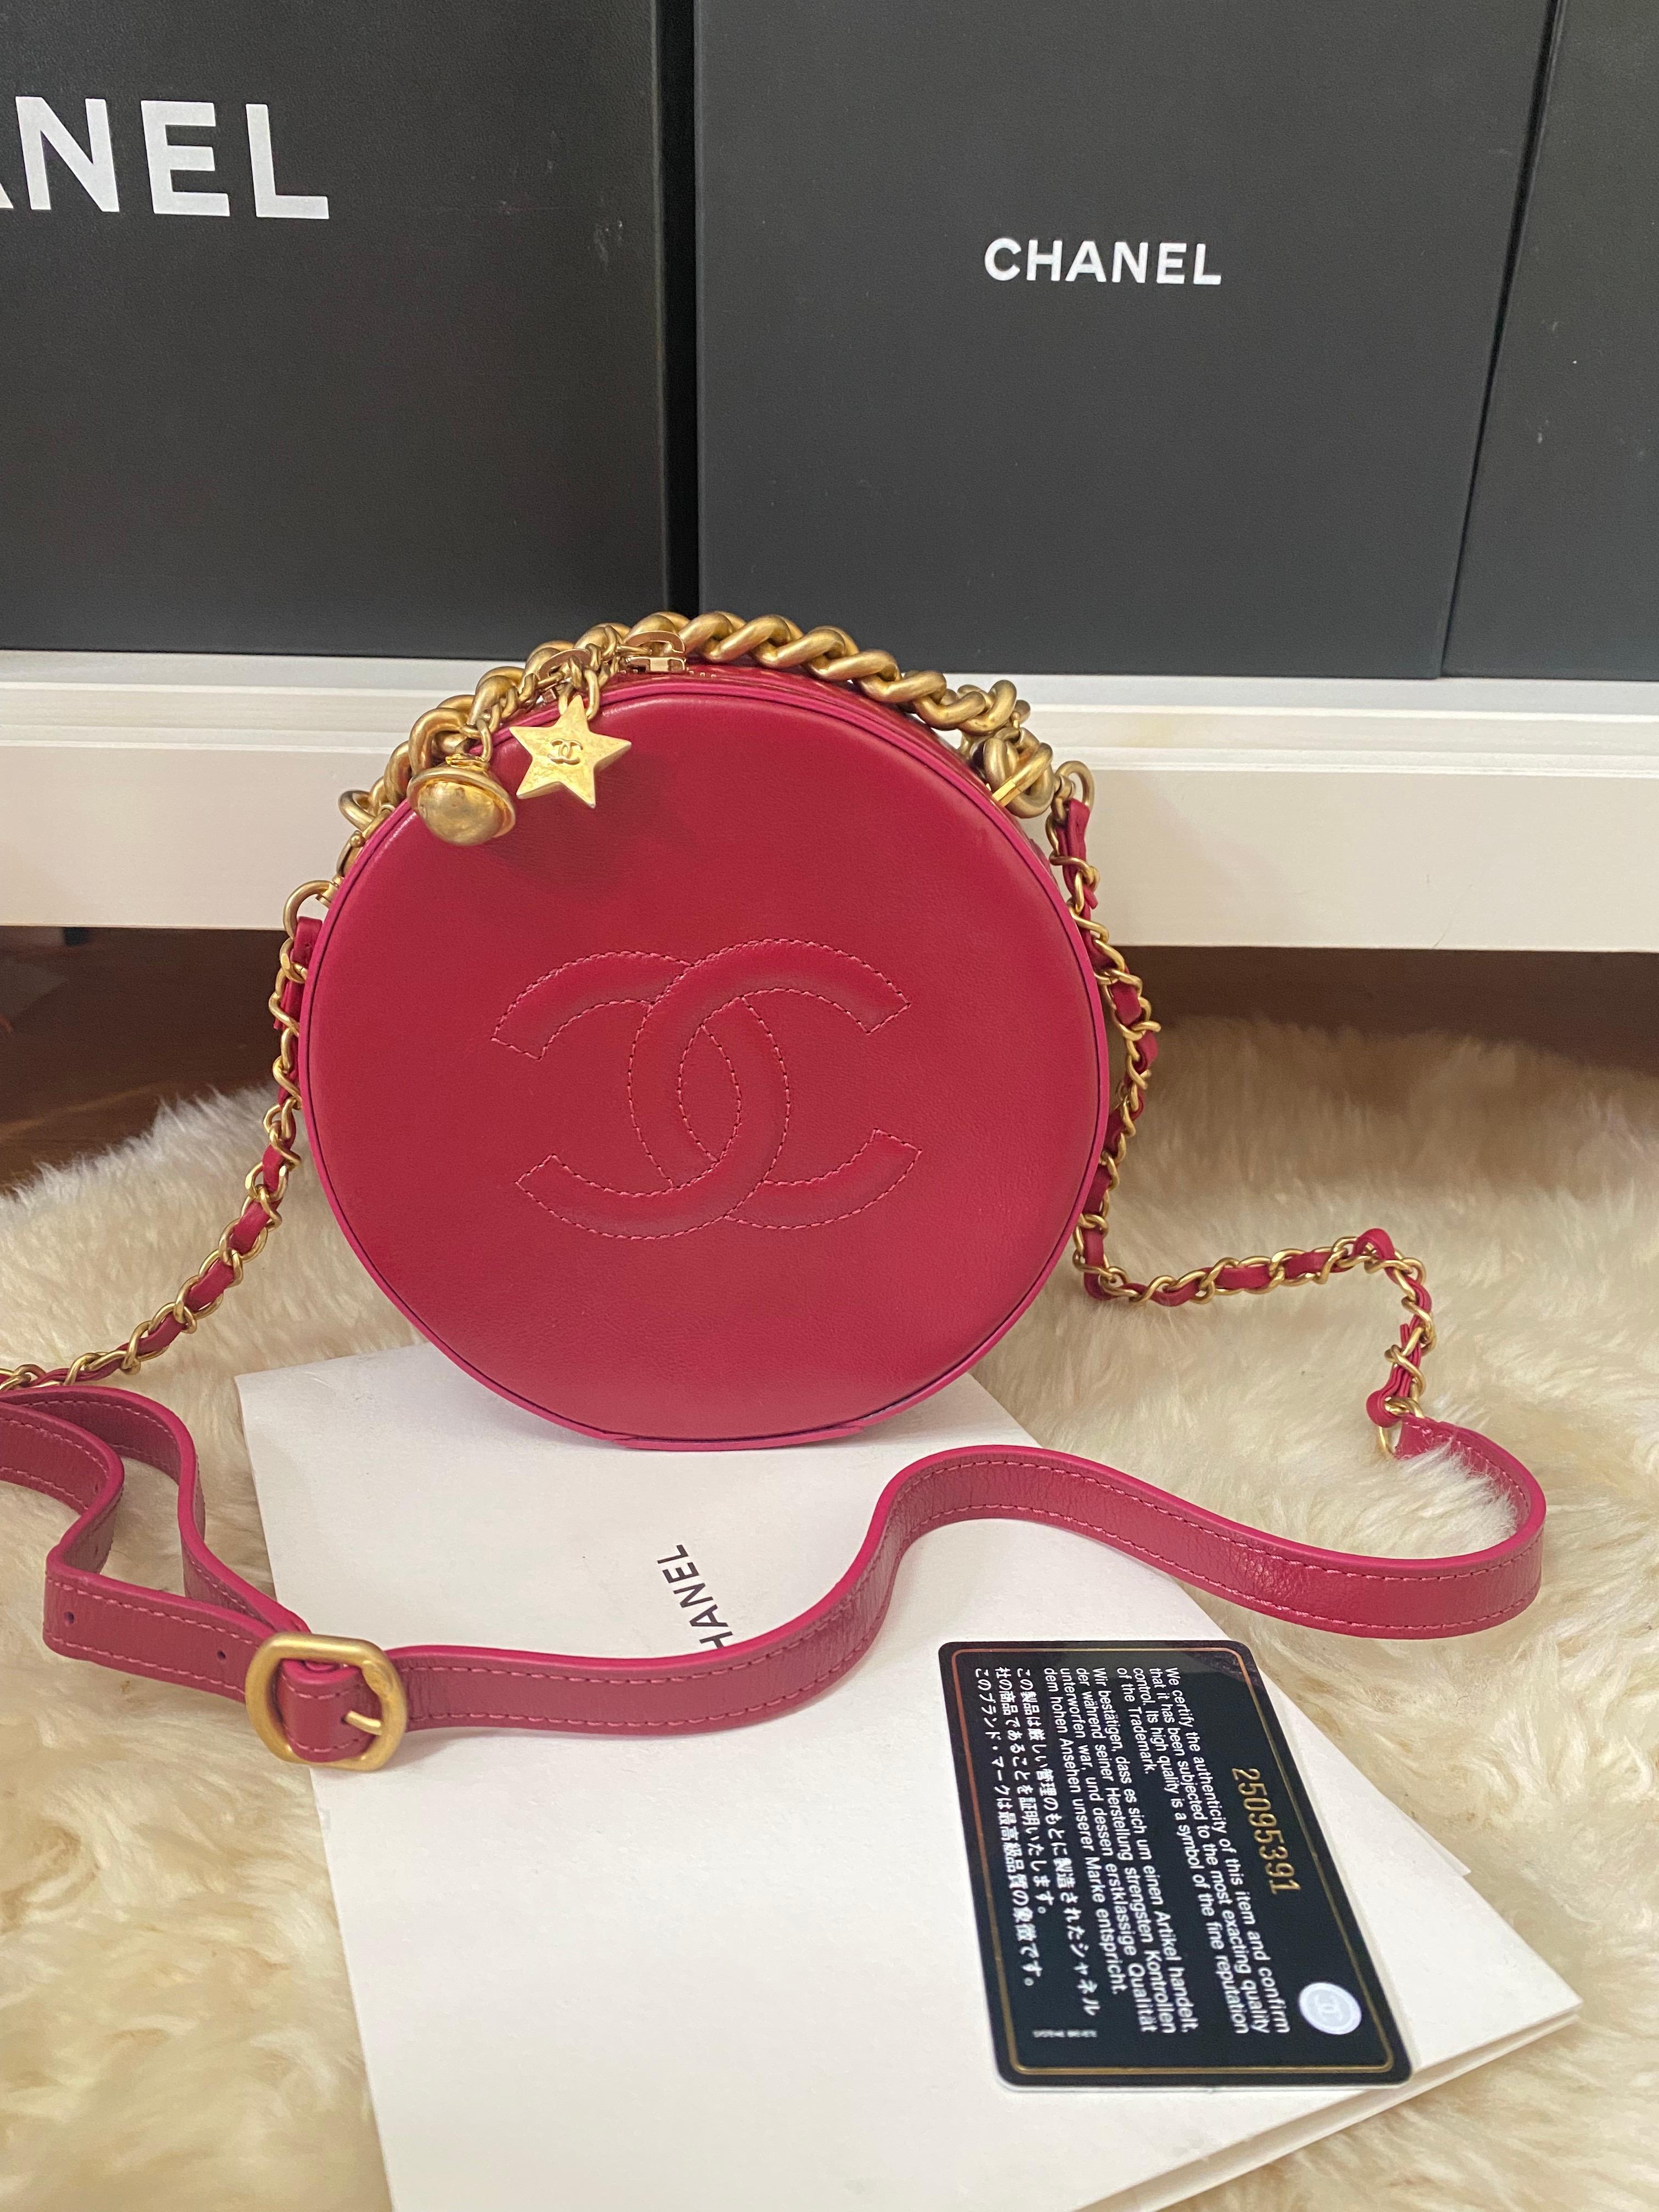 This Chanel Round as Earth Crossbody Patent, crafted from pink patent leather, features a short chunky chain strap, round silhouette, and gold-tone hardware. Its zip closure opens to a fabric interior with slip pocket. 

Estimated Retail Price: